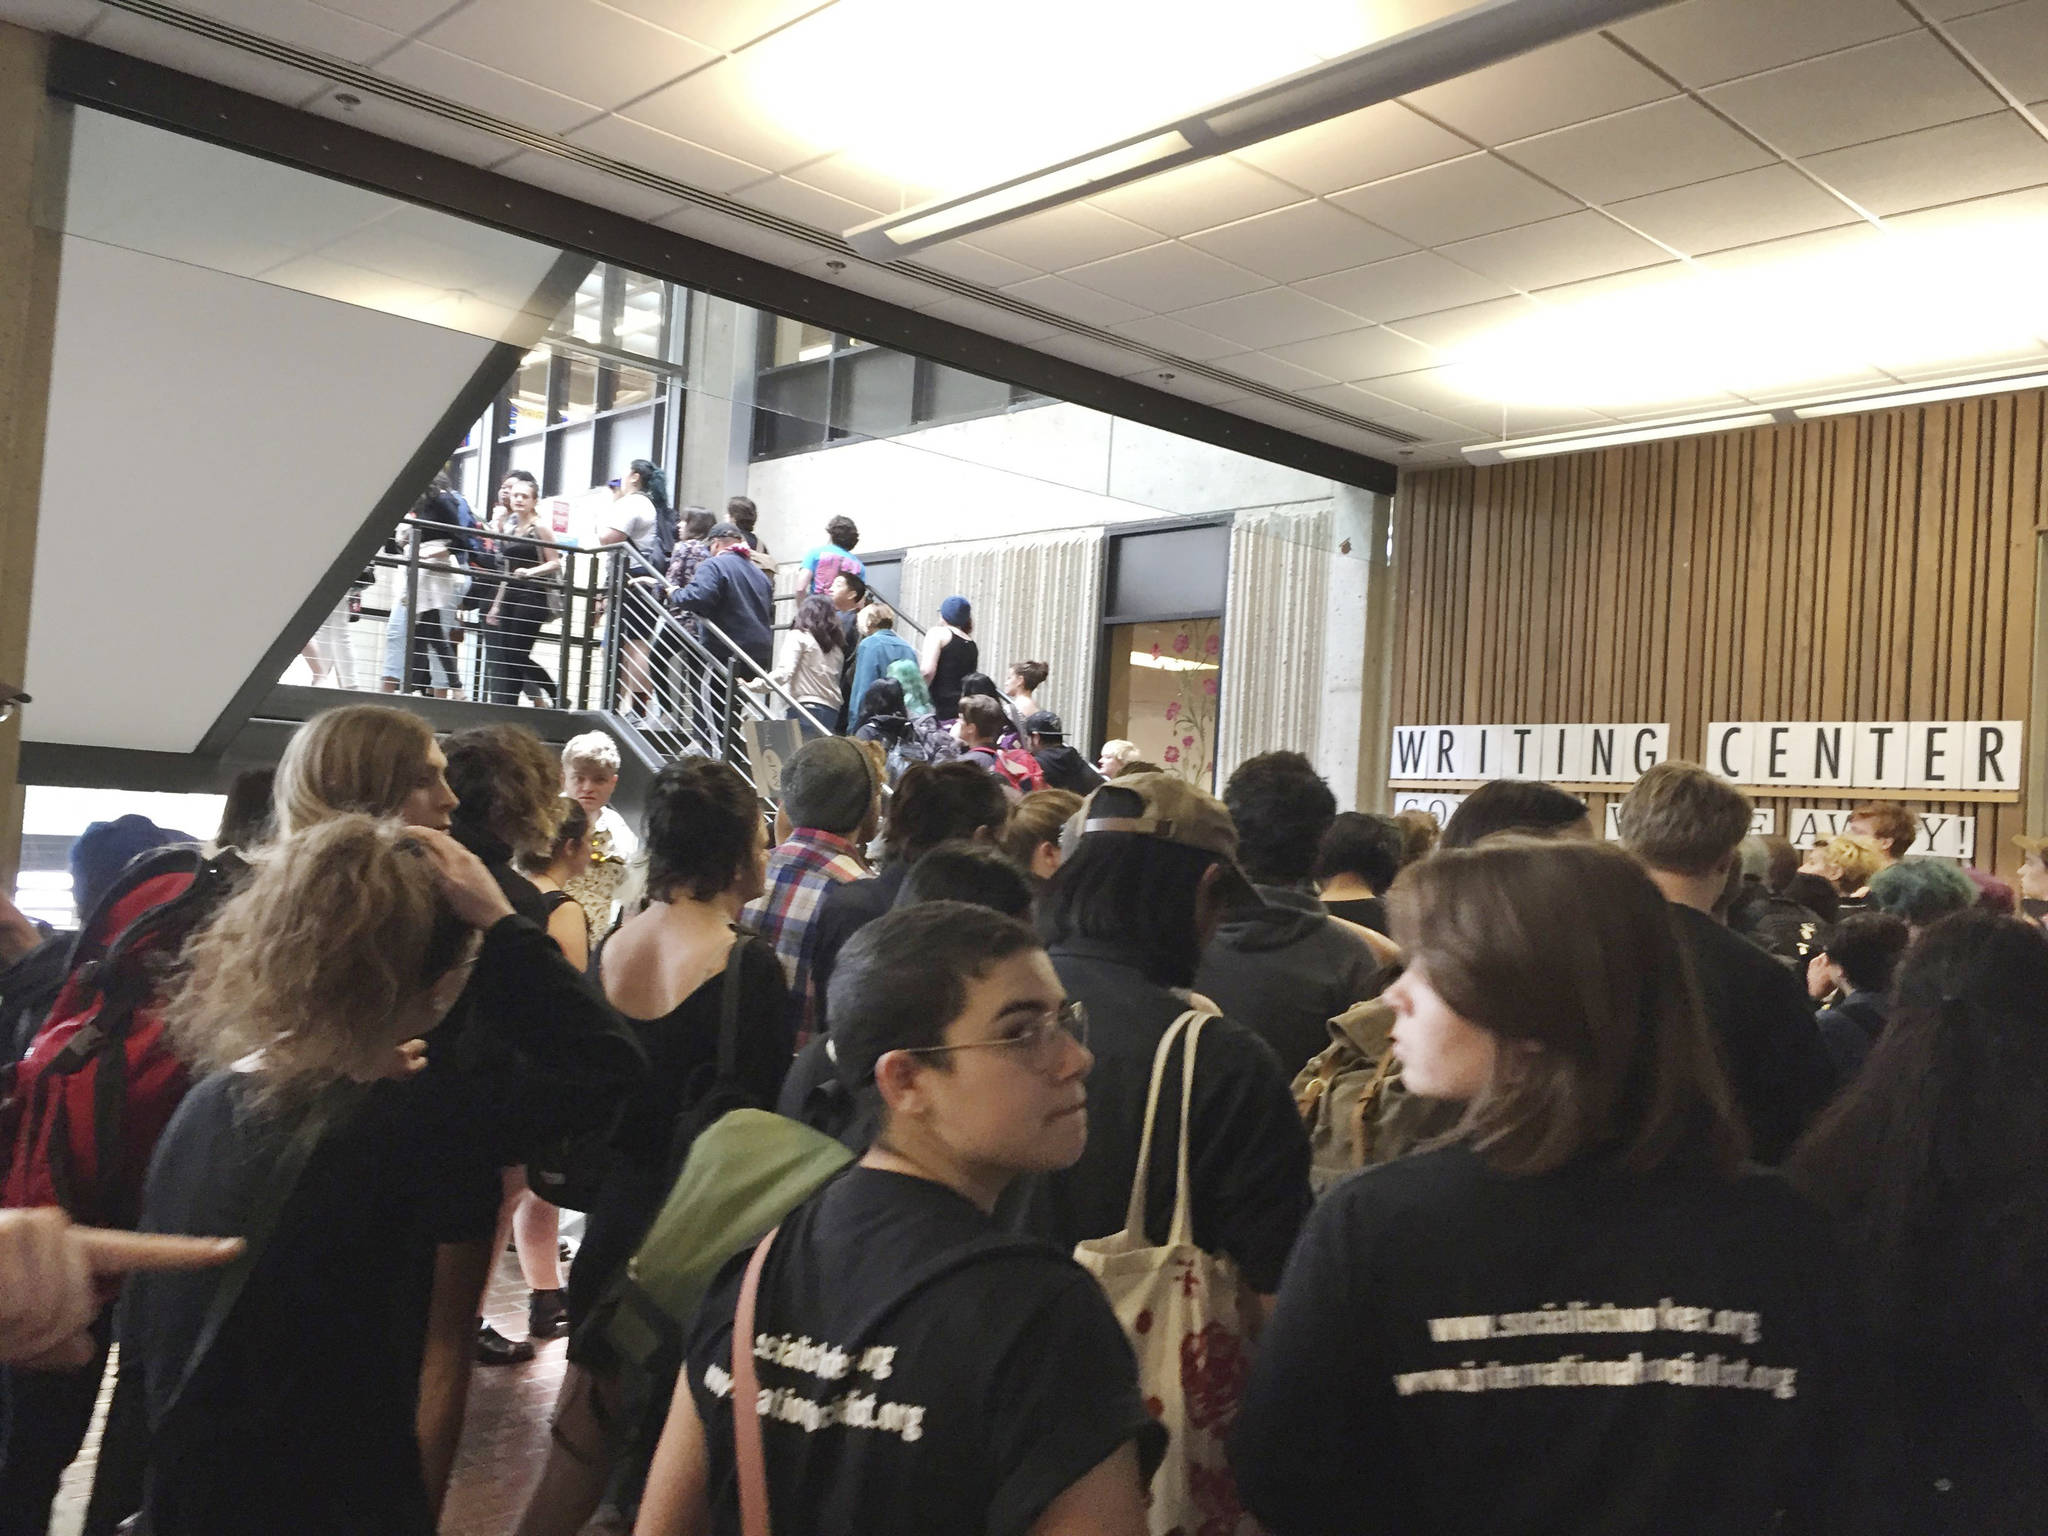 Threat closes Evergreen State College after protests over race